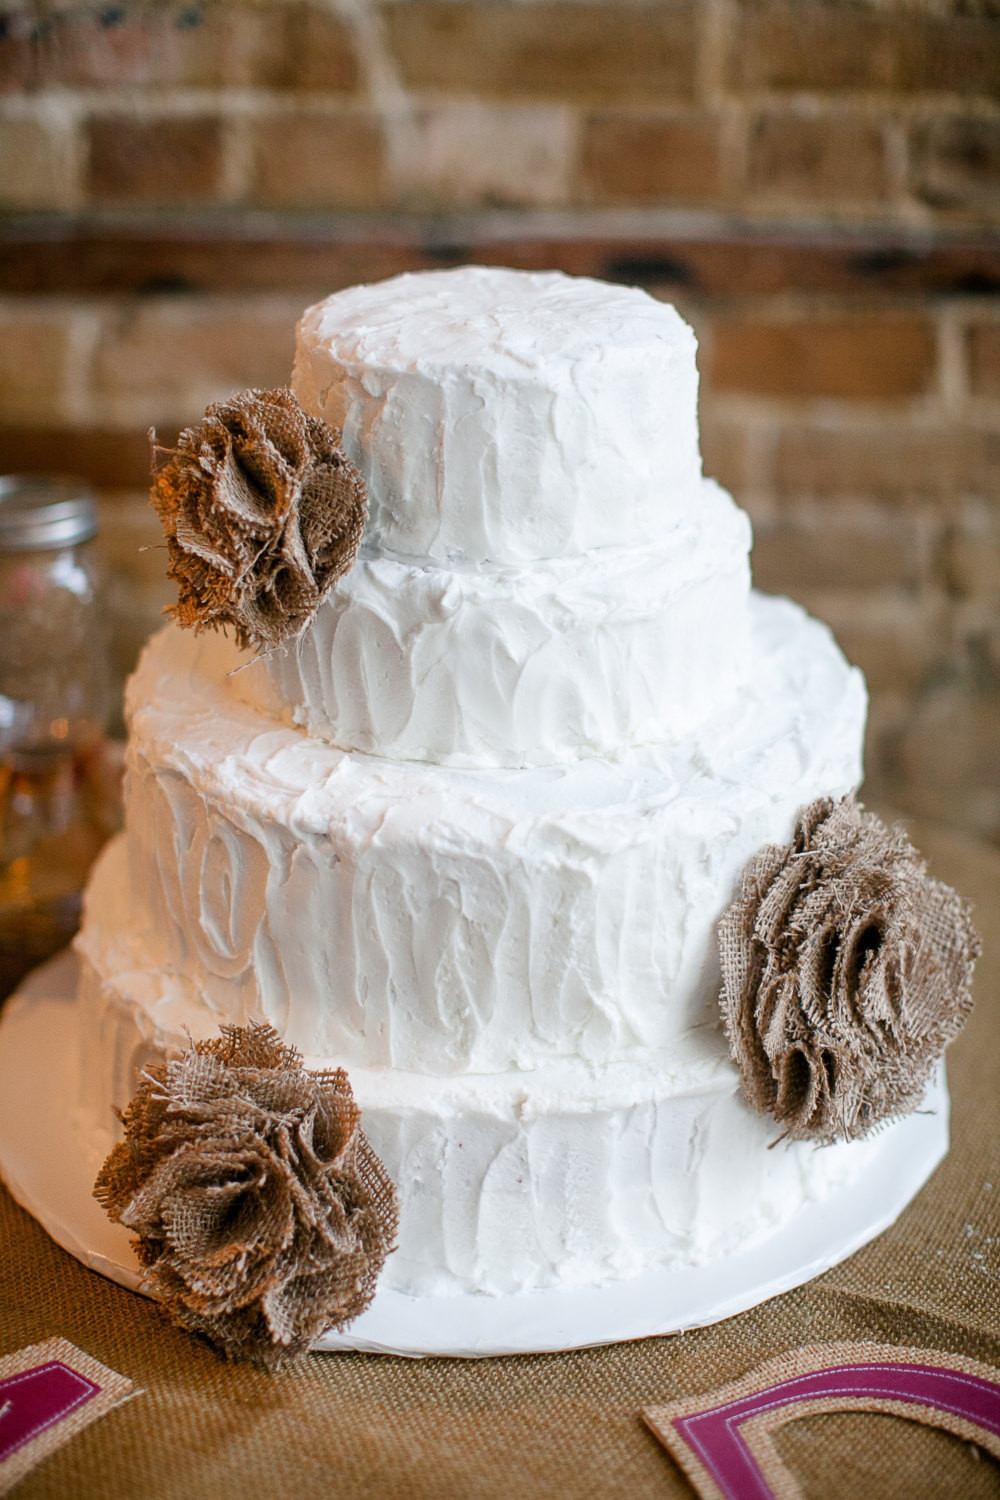 Rustic Wedding Cakes With Burlap
 3 ooak natural burlap flower wedding cake decor toppers pew